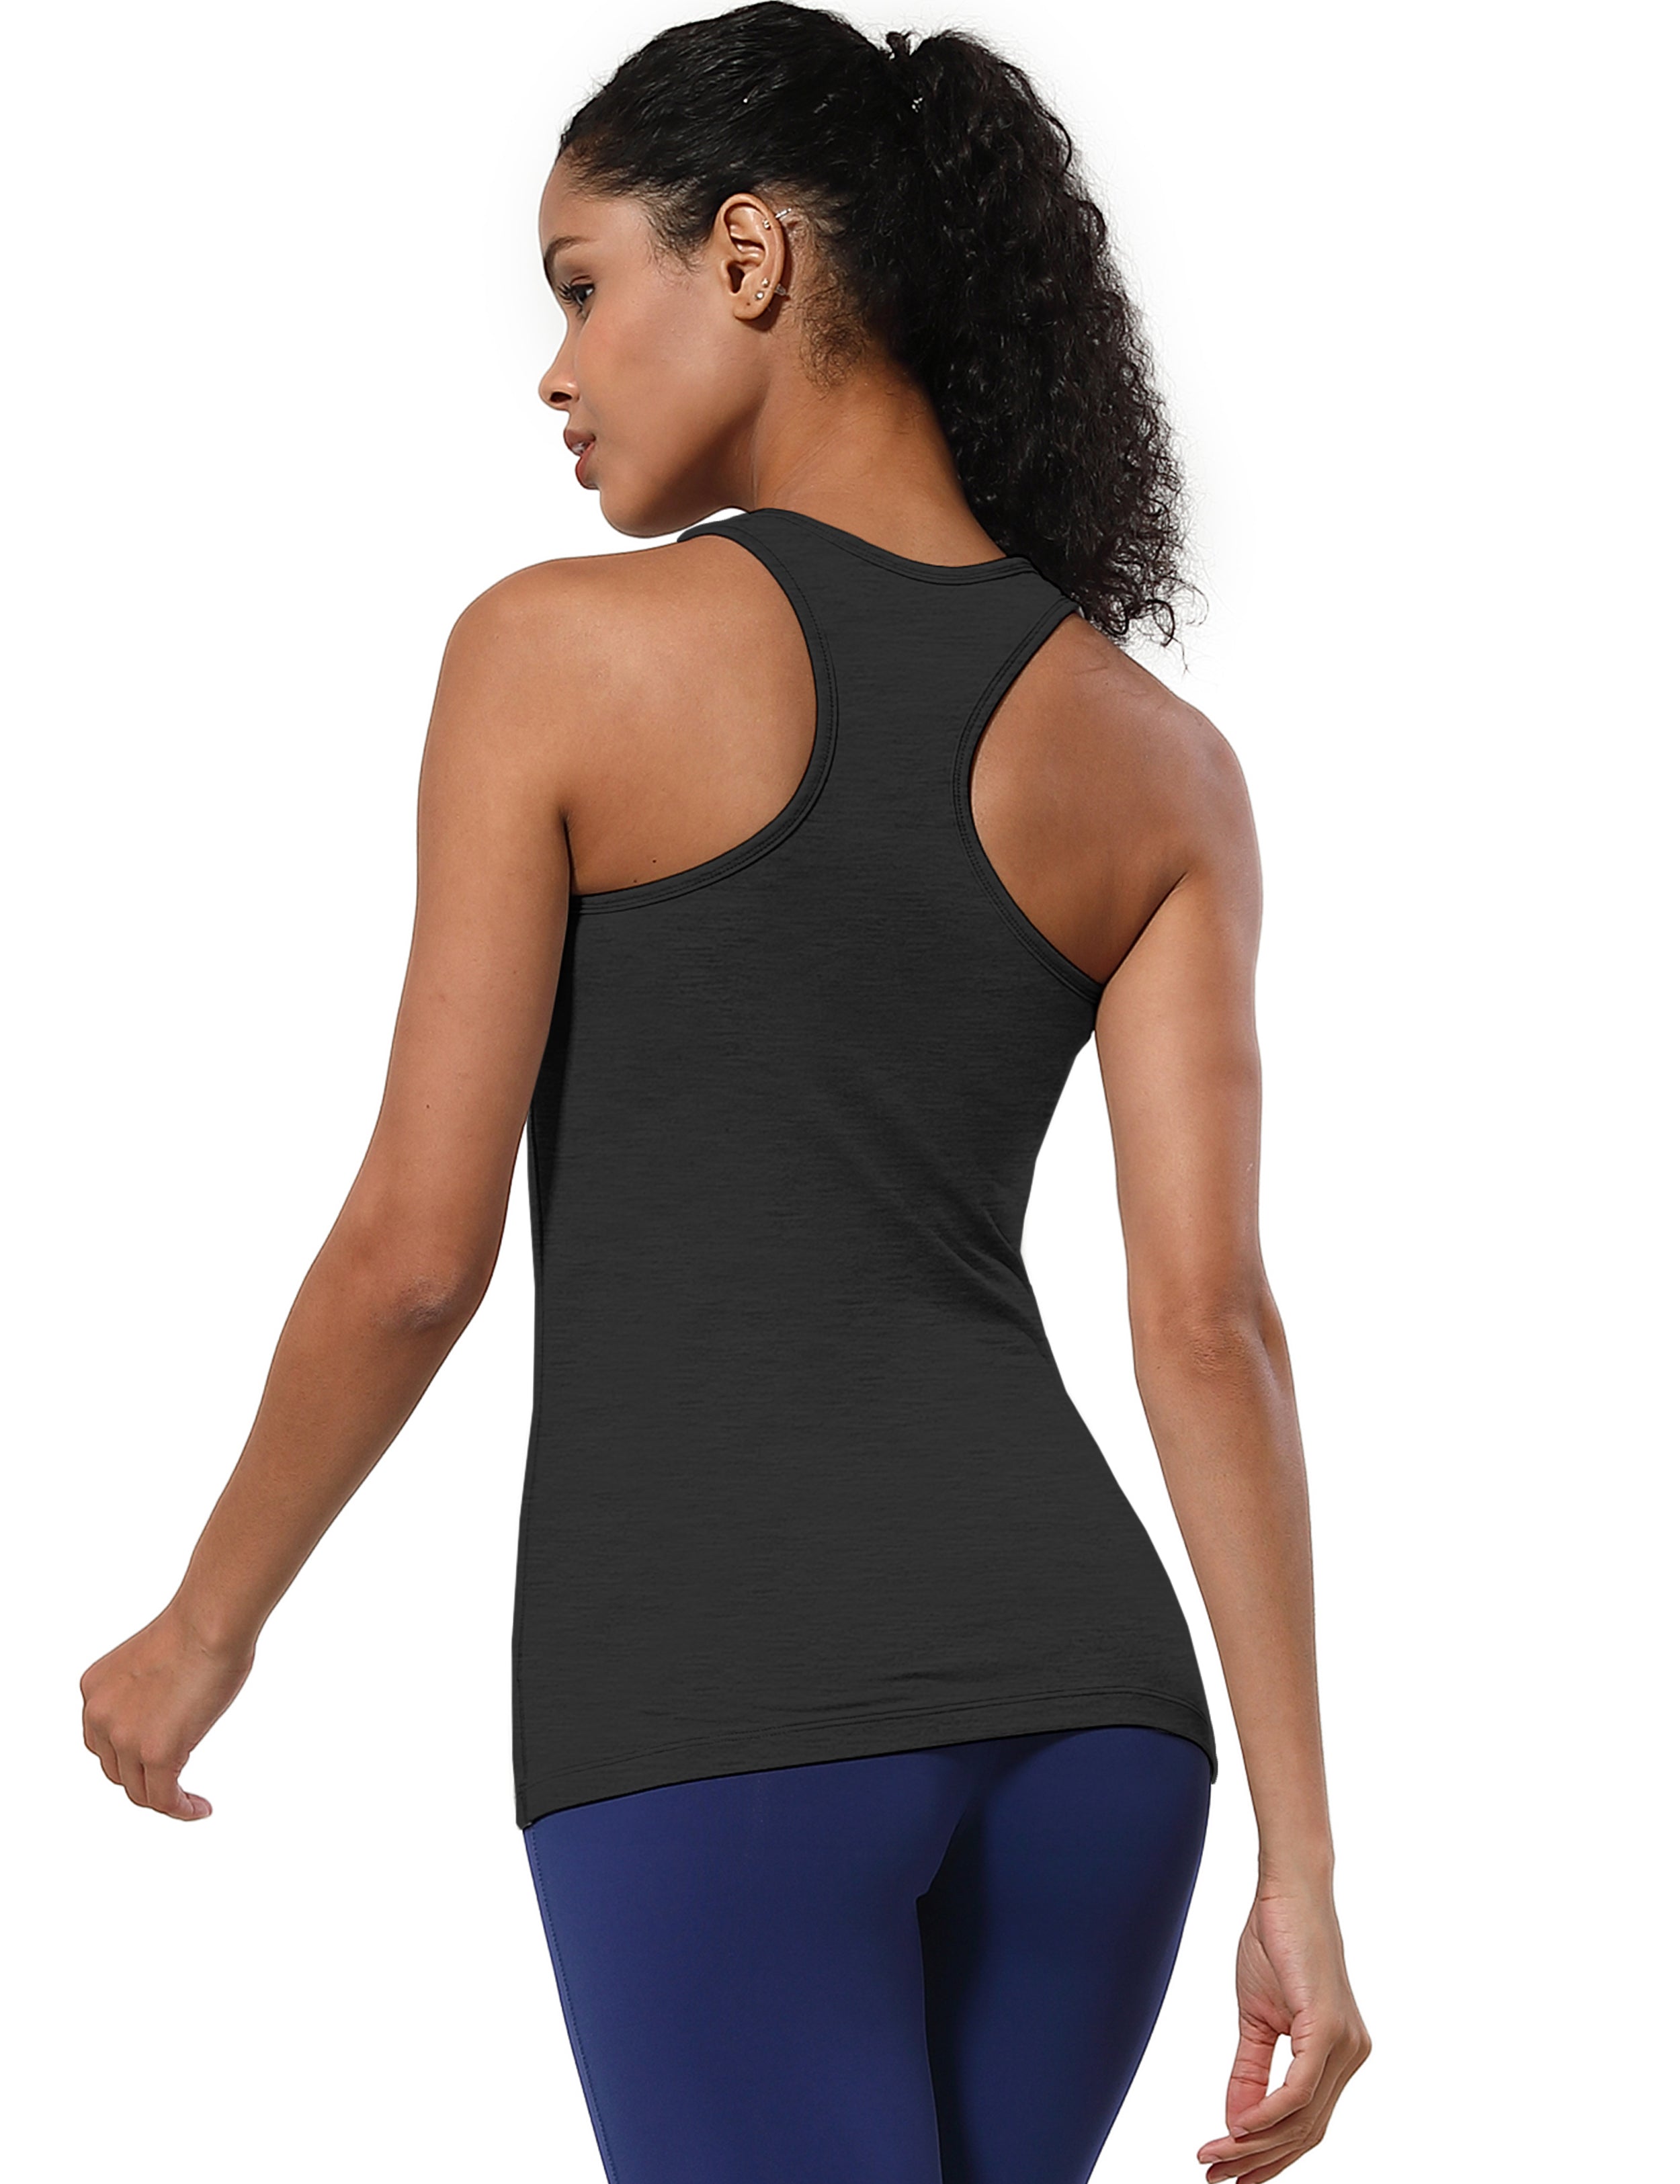 Racerback Athletic Tank Tops heathercharcoal 92%Nylon/8%Spandex(Cotton Soft) Designed for Golf Tight Fit So buttery soft, it feels weightless Sweat-wicking Four-way stretch Breathable Contours your body Sits below the waistband for moderate, everyday coverage